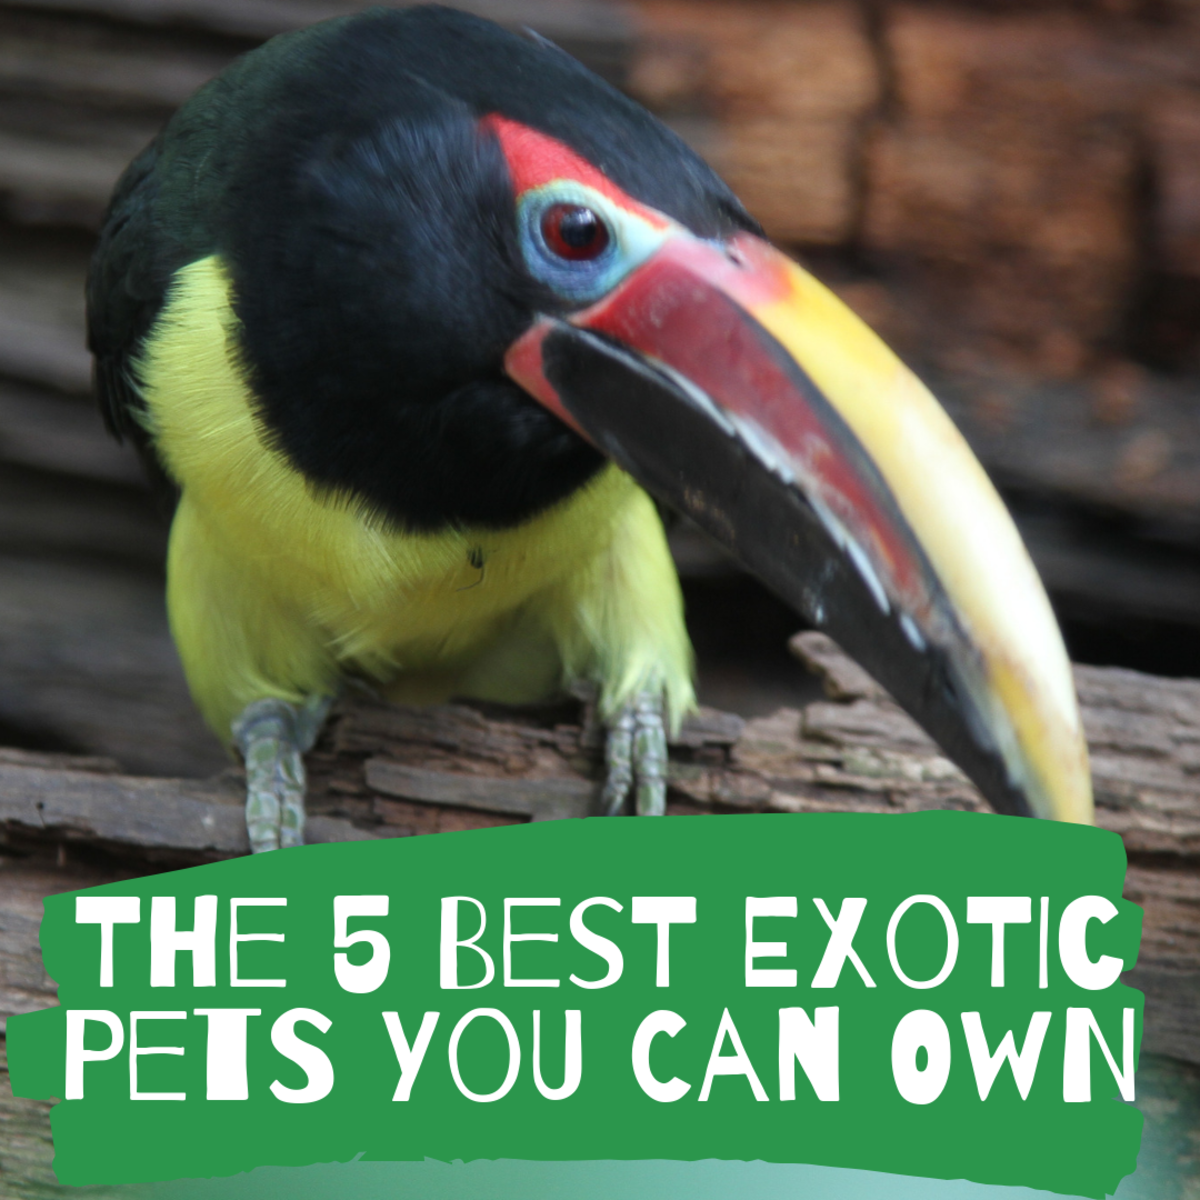 5 Best Exotic Pets to Own